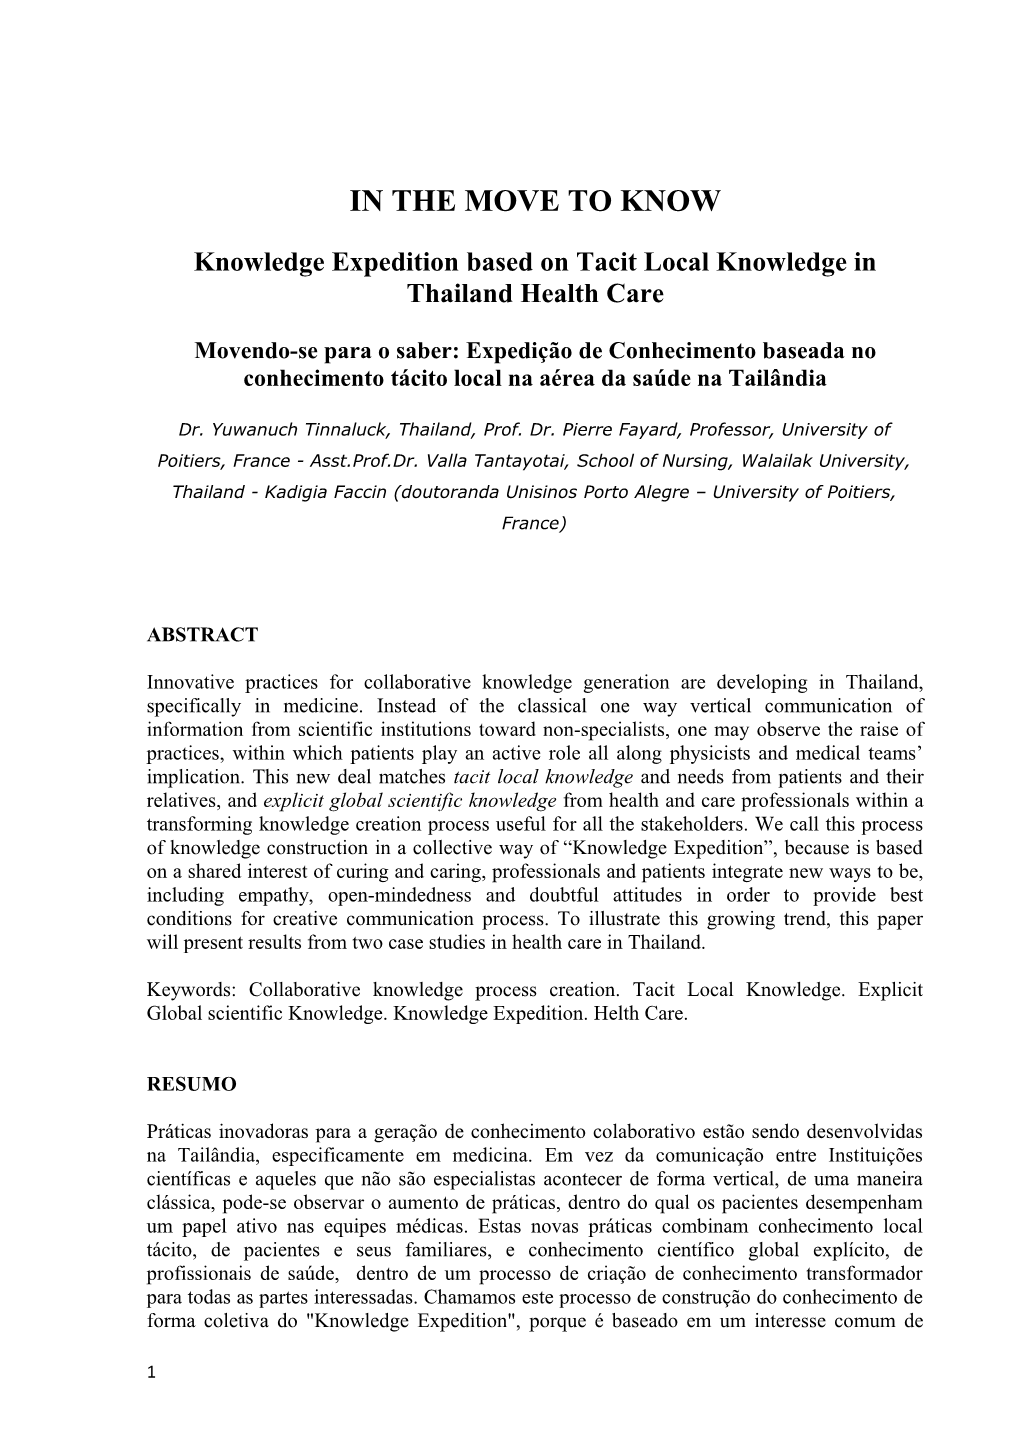 Knowledge Expedition Based on Tacit Local Knowledge in Thailand Health Care